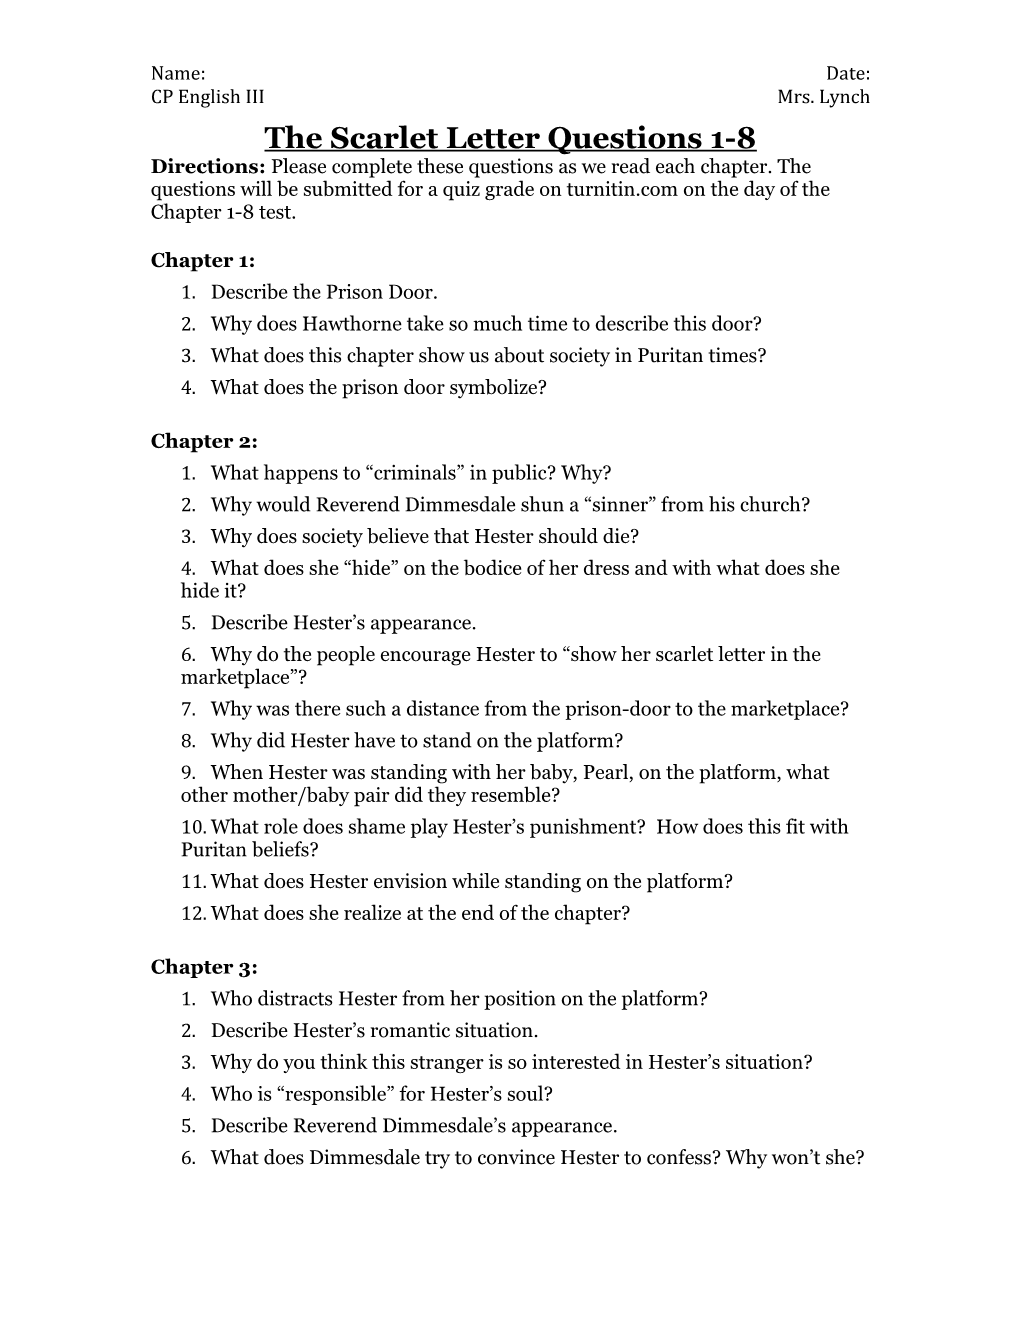 The Scarlet Letter Questions 1-8